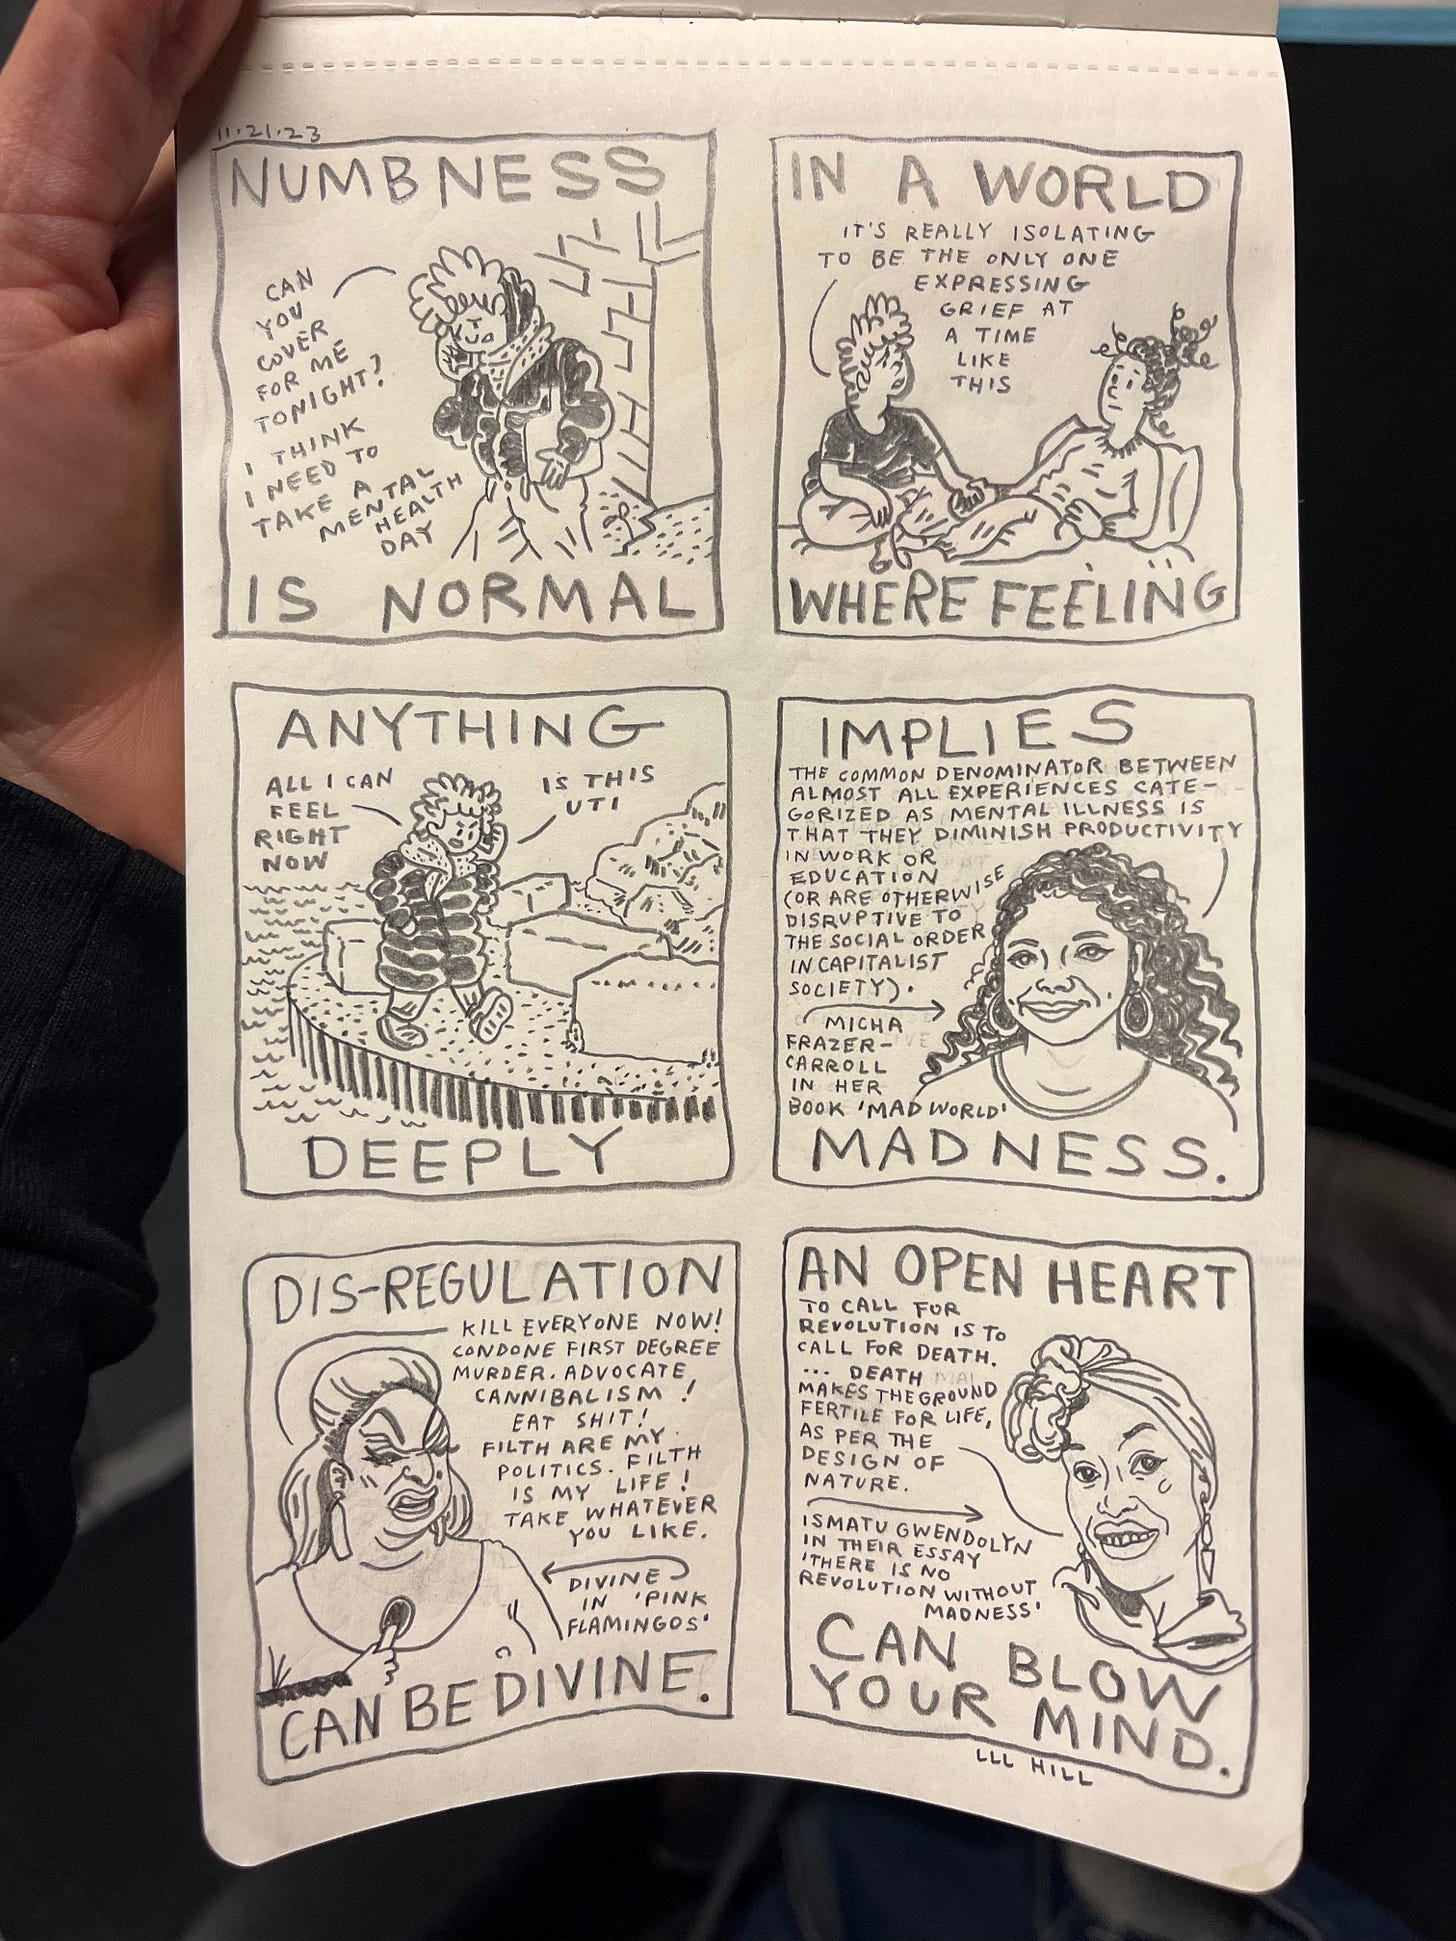 a photograph of full-page Pleasure Hex comic strip in a notebook. The large text in each panel reads: 'NUMBNESS IS NORMAL IN A WORLD WHERE FEELING ANYTHING DEEPLY IMPLIES MADNESS. DIS-REGULATION CAN BE DIVINE. AN OPEN HEART CAN BLOW YOUR MIND.'